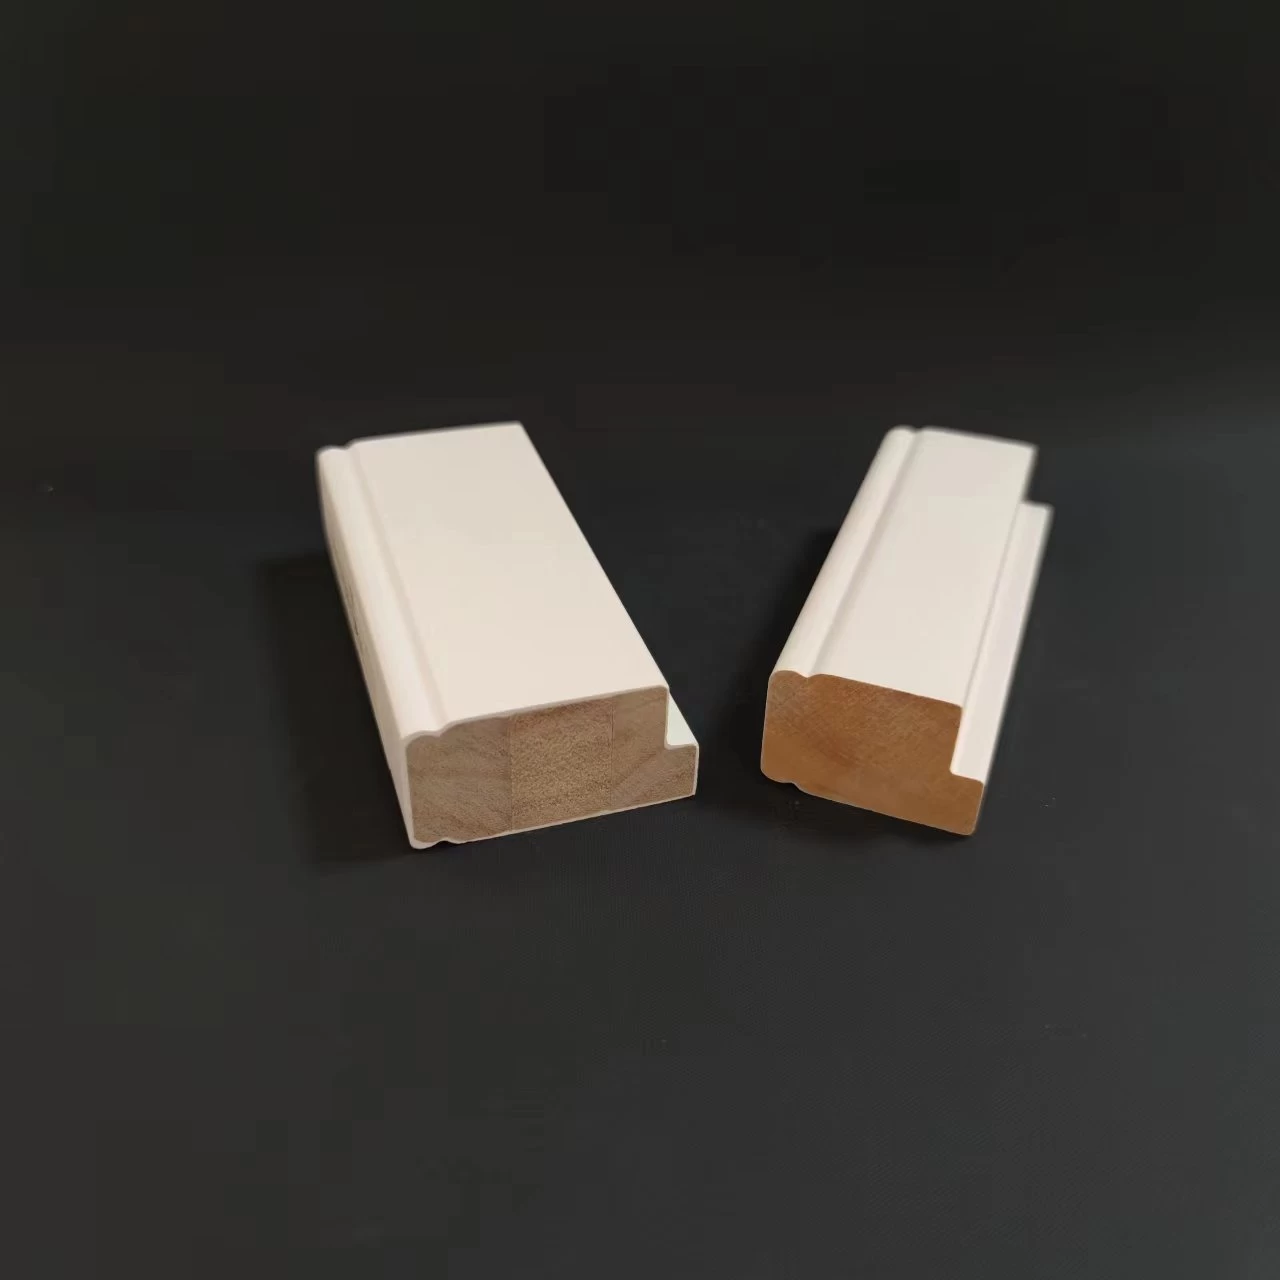 China Wooden Components manufacturer, Wooden Components Supplier, Wooden Components Factory